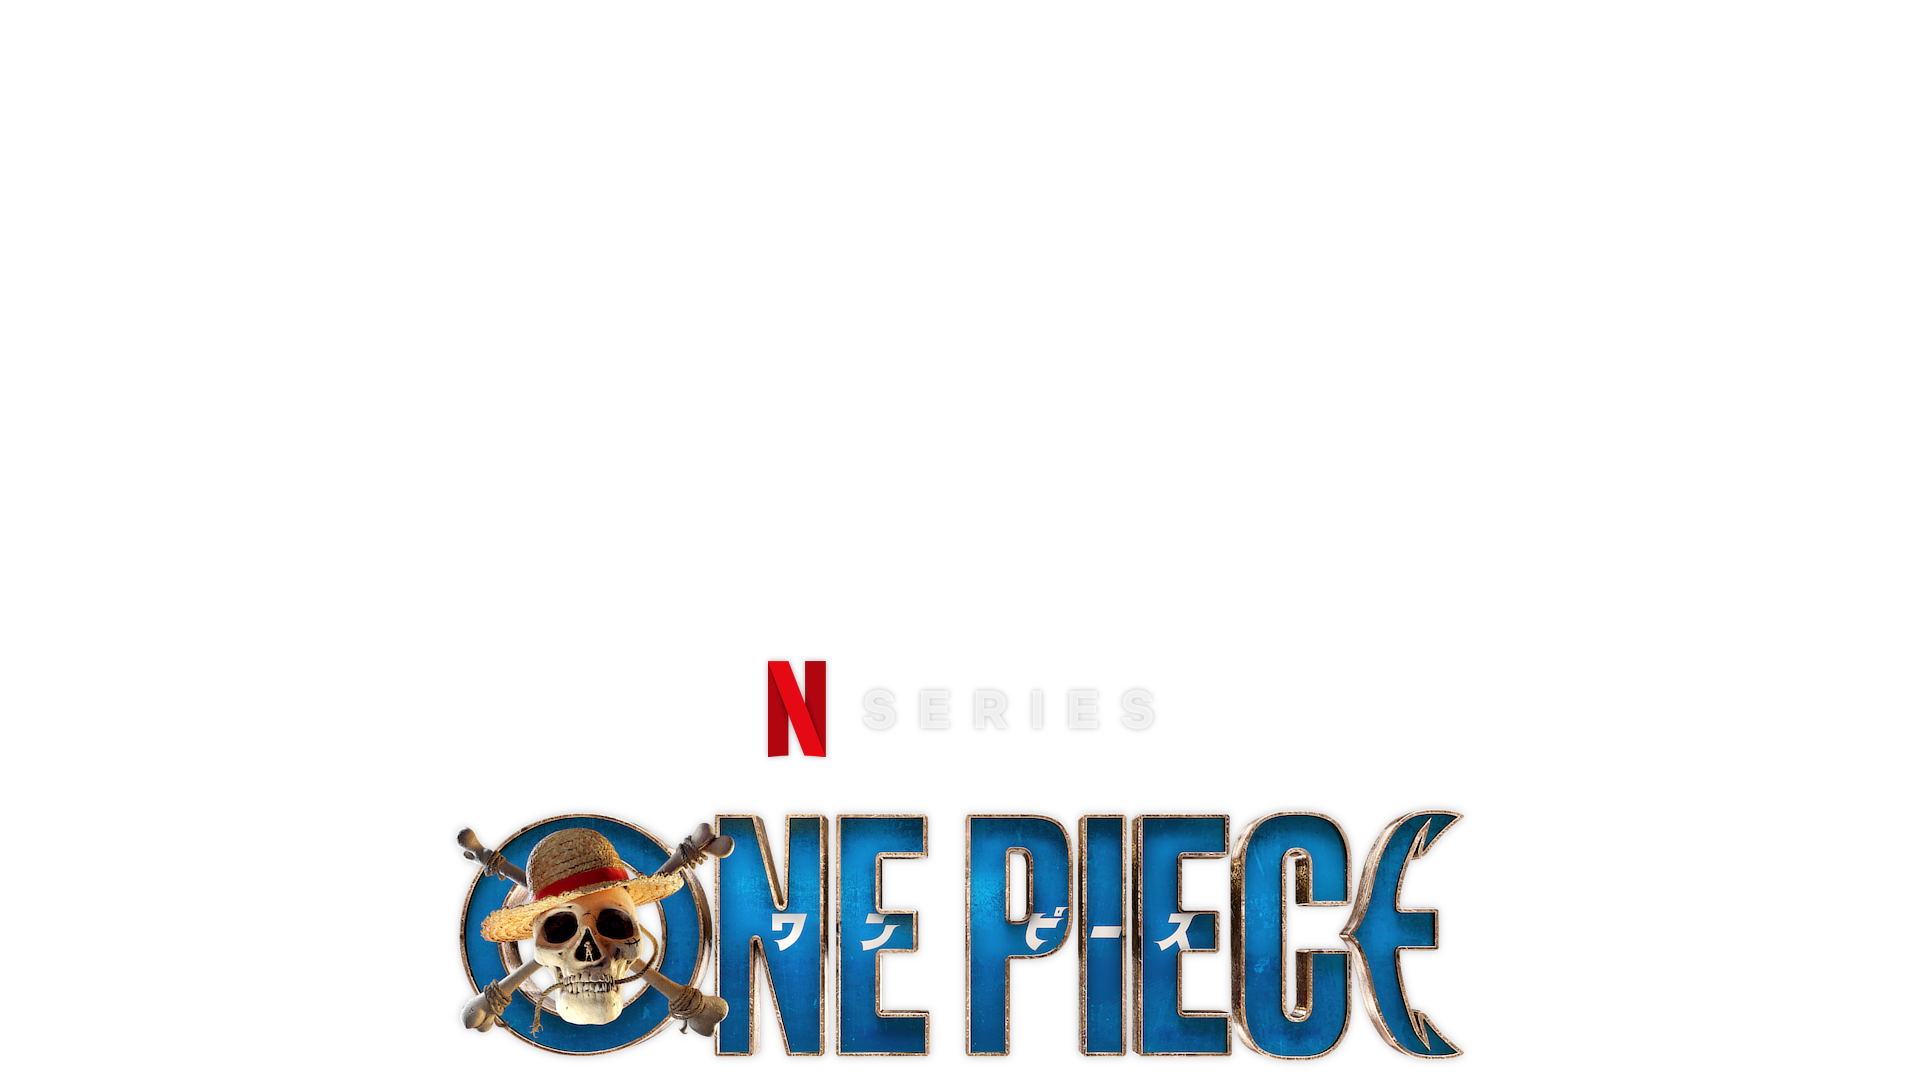 Is there an episode 9 in One Piece season 1 on Netflix?